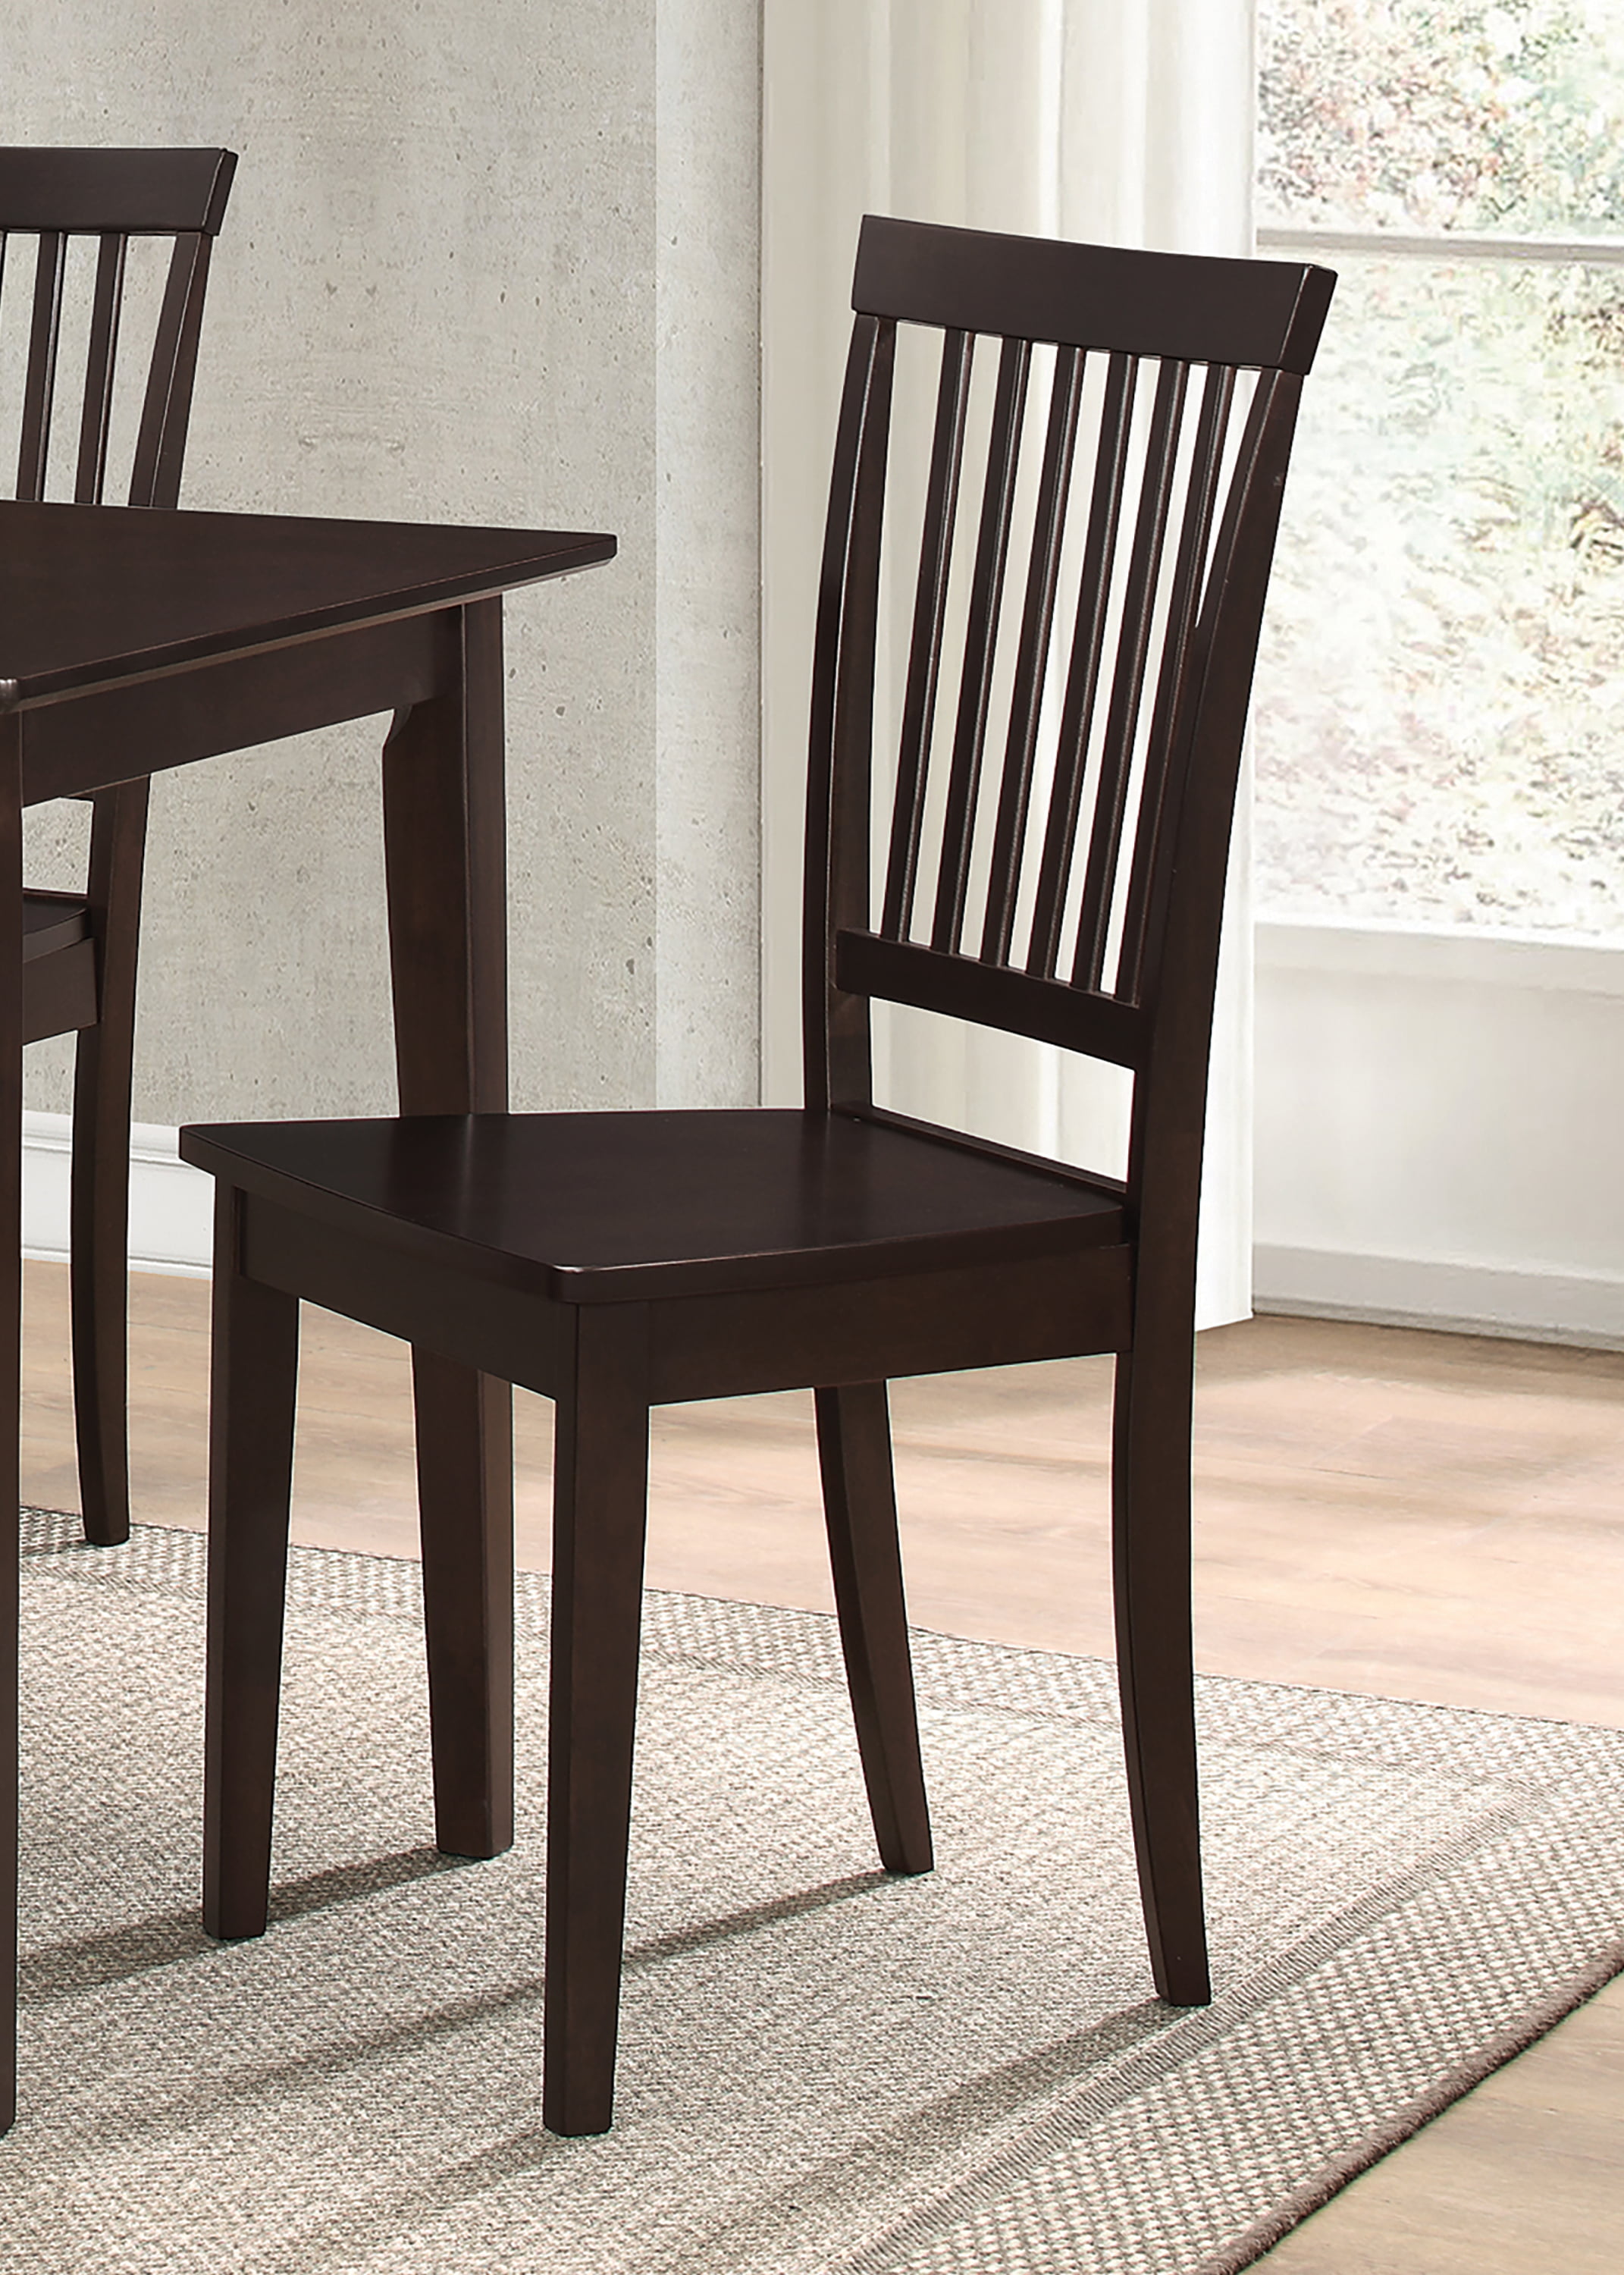 Coaster Company Oakdale Apartment Size, Apartment Size Dining Room Chairs